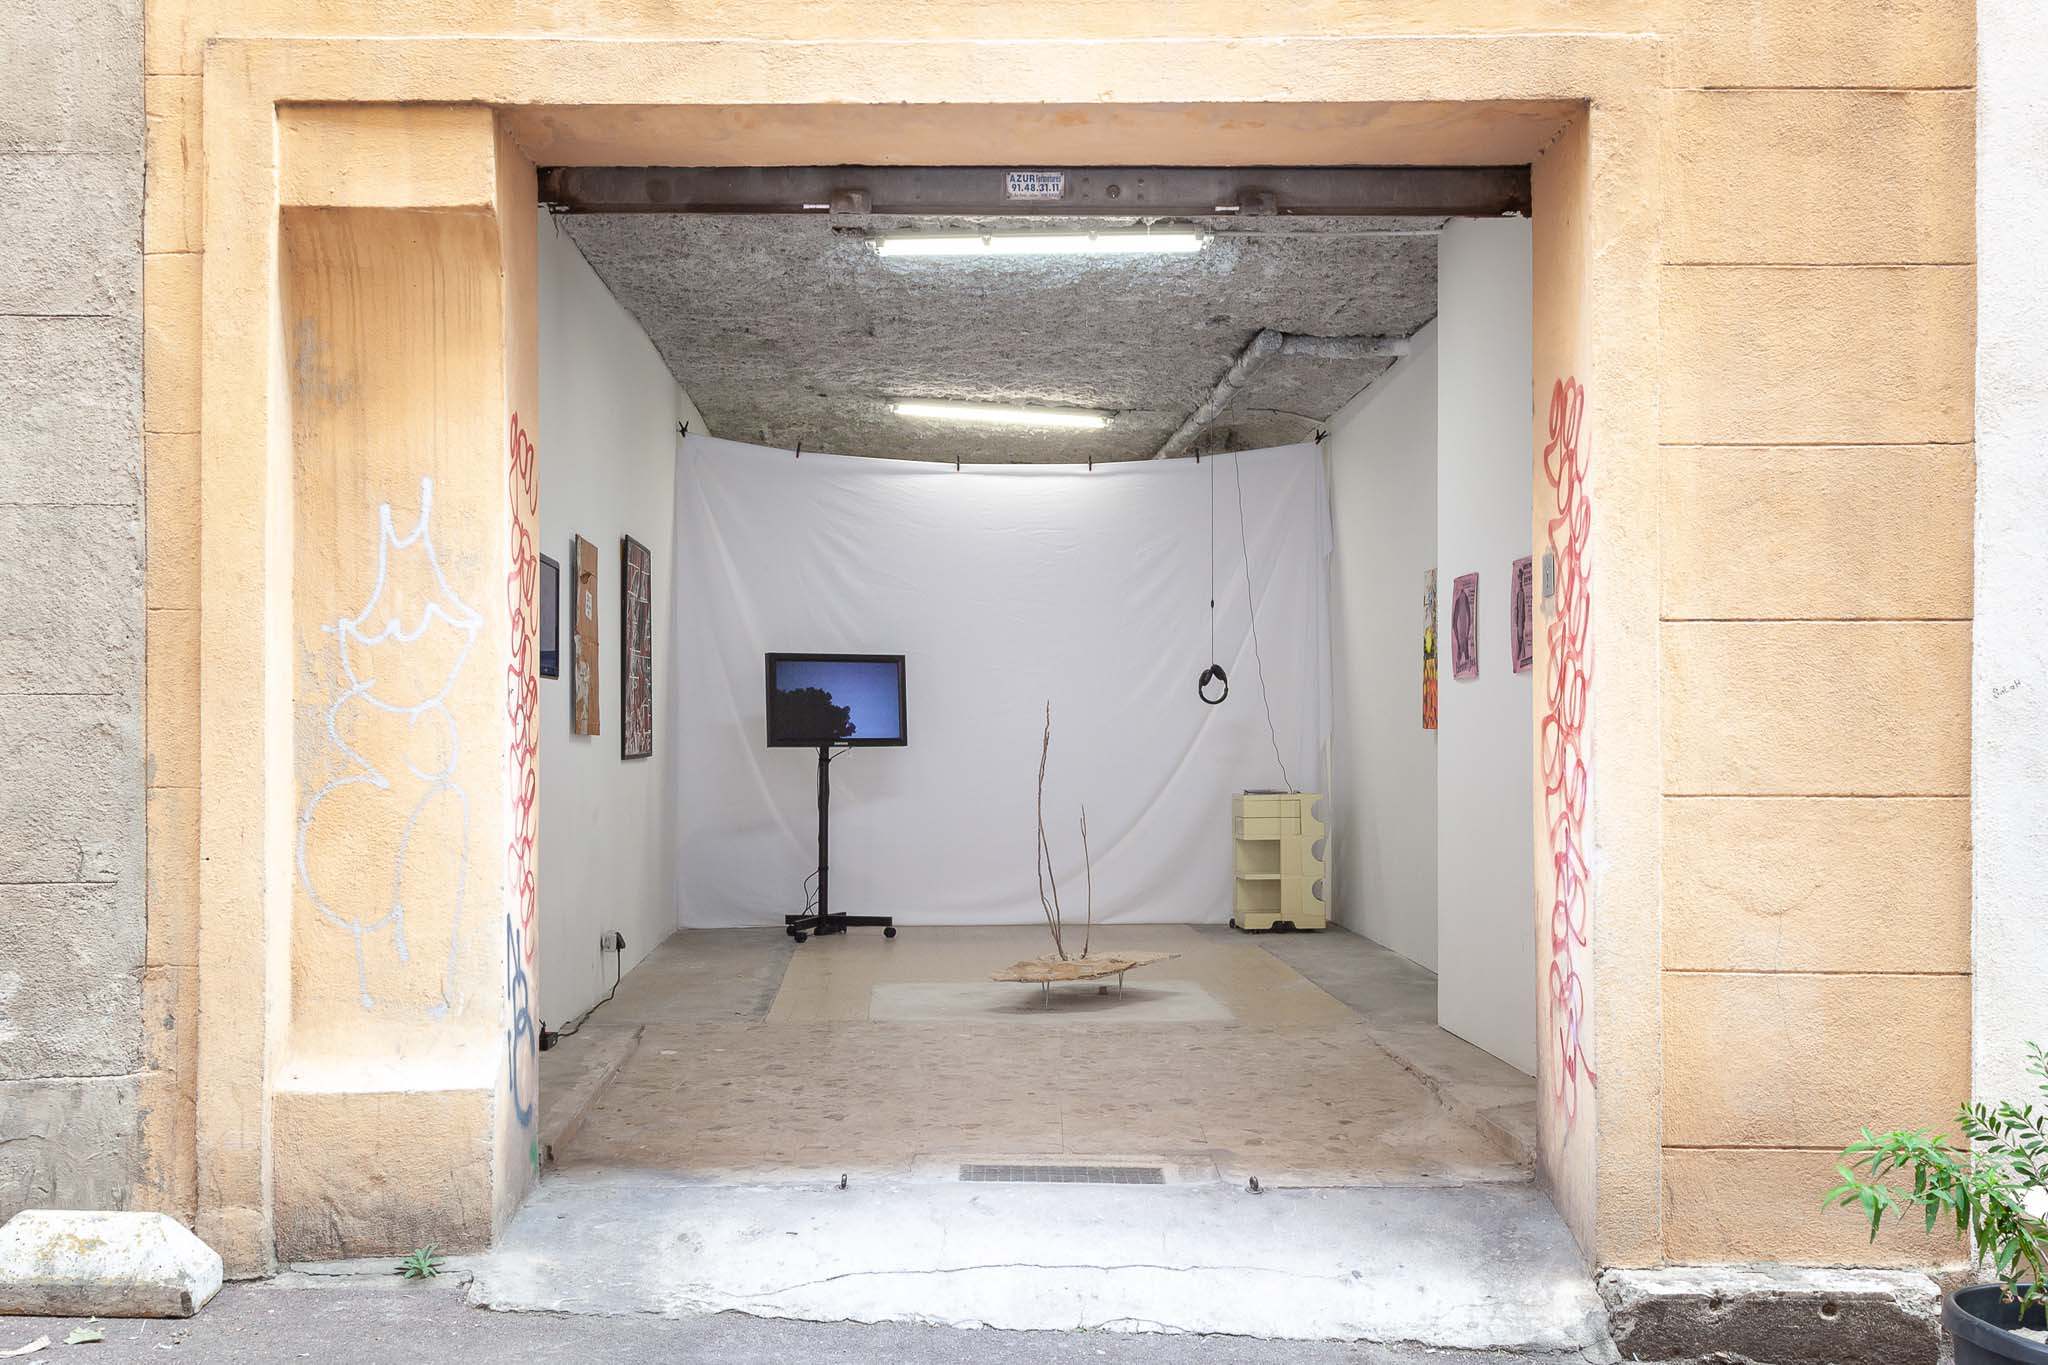 Installation view, 'Porous Cities', South Parade at Feria (Organised by Sofia HallstrÃ¶m)